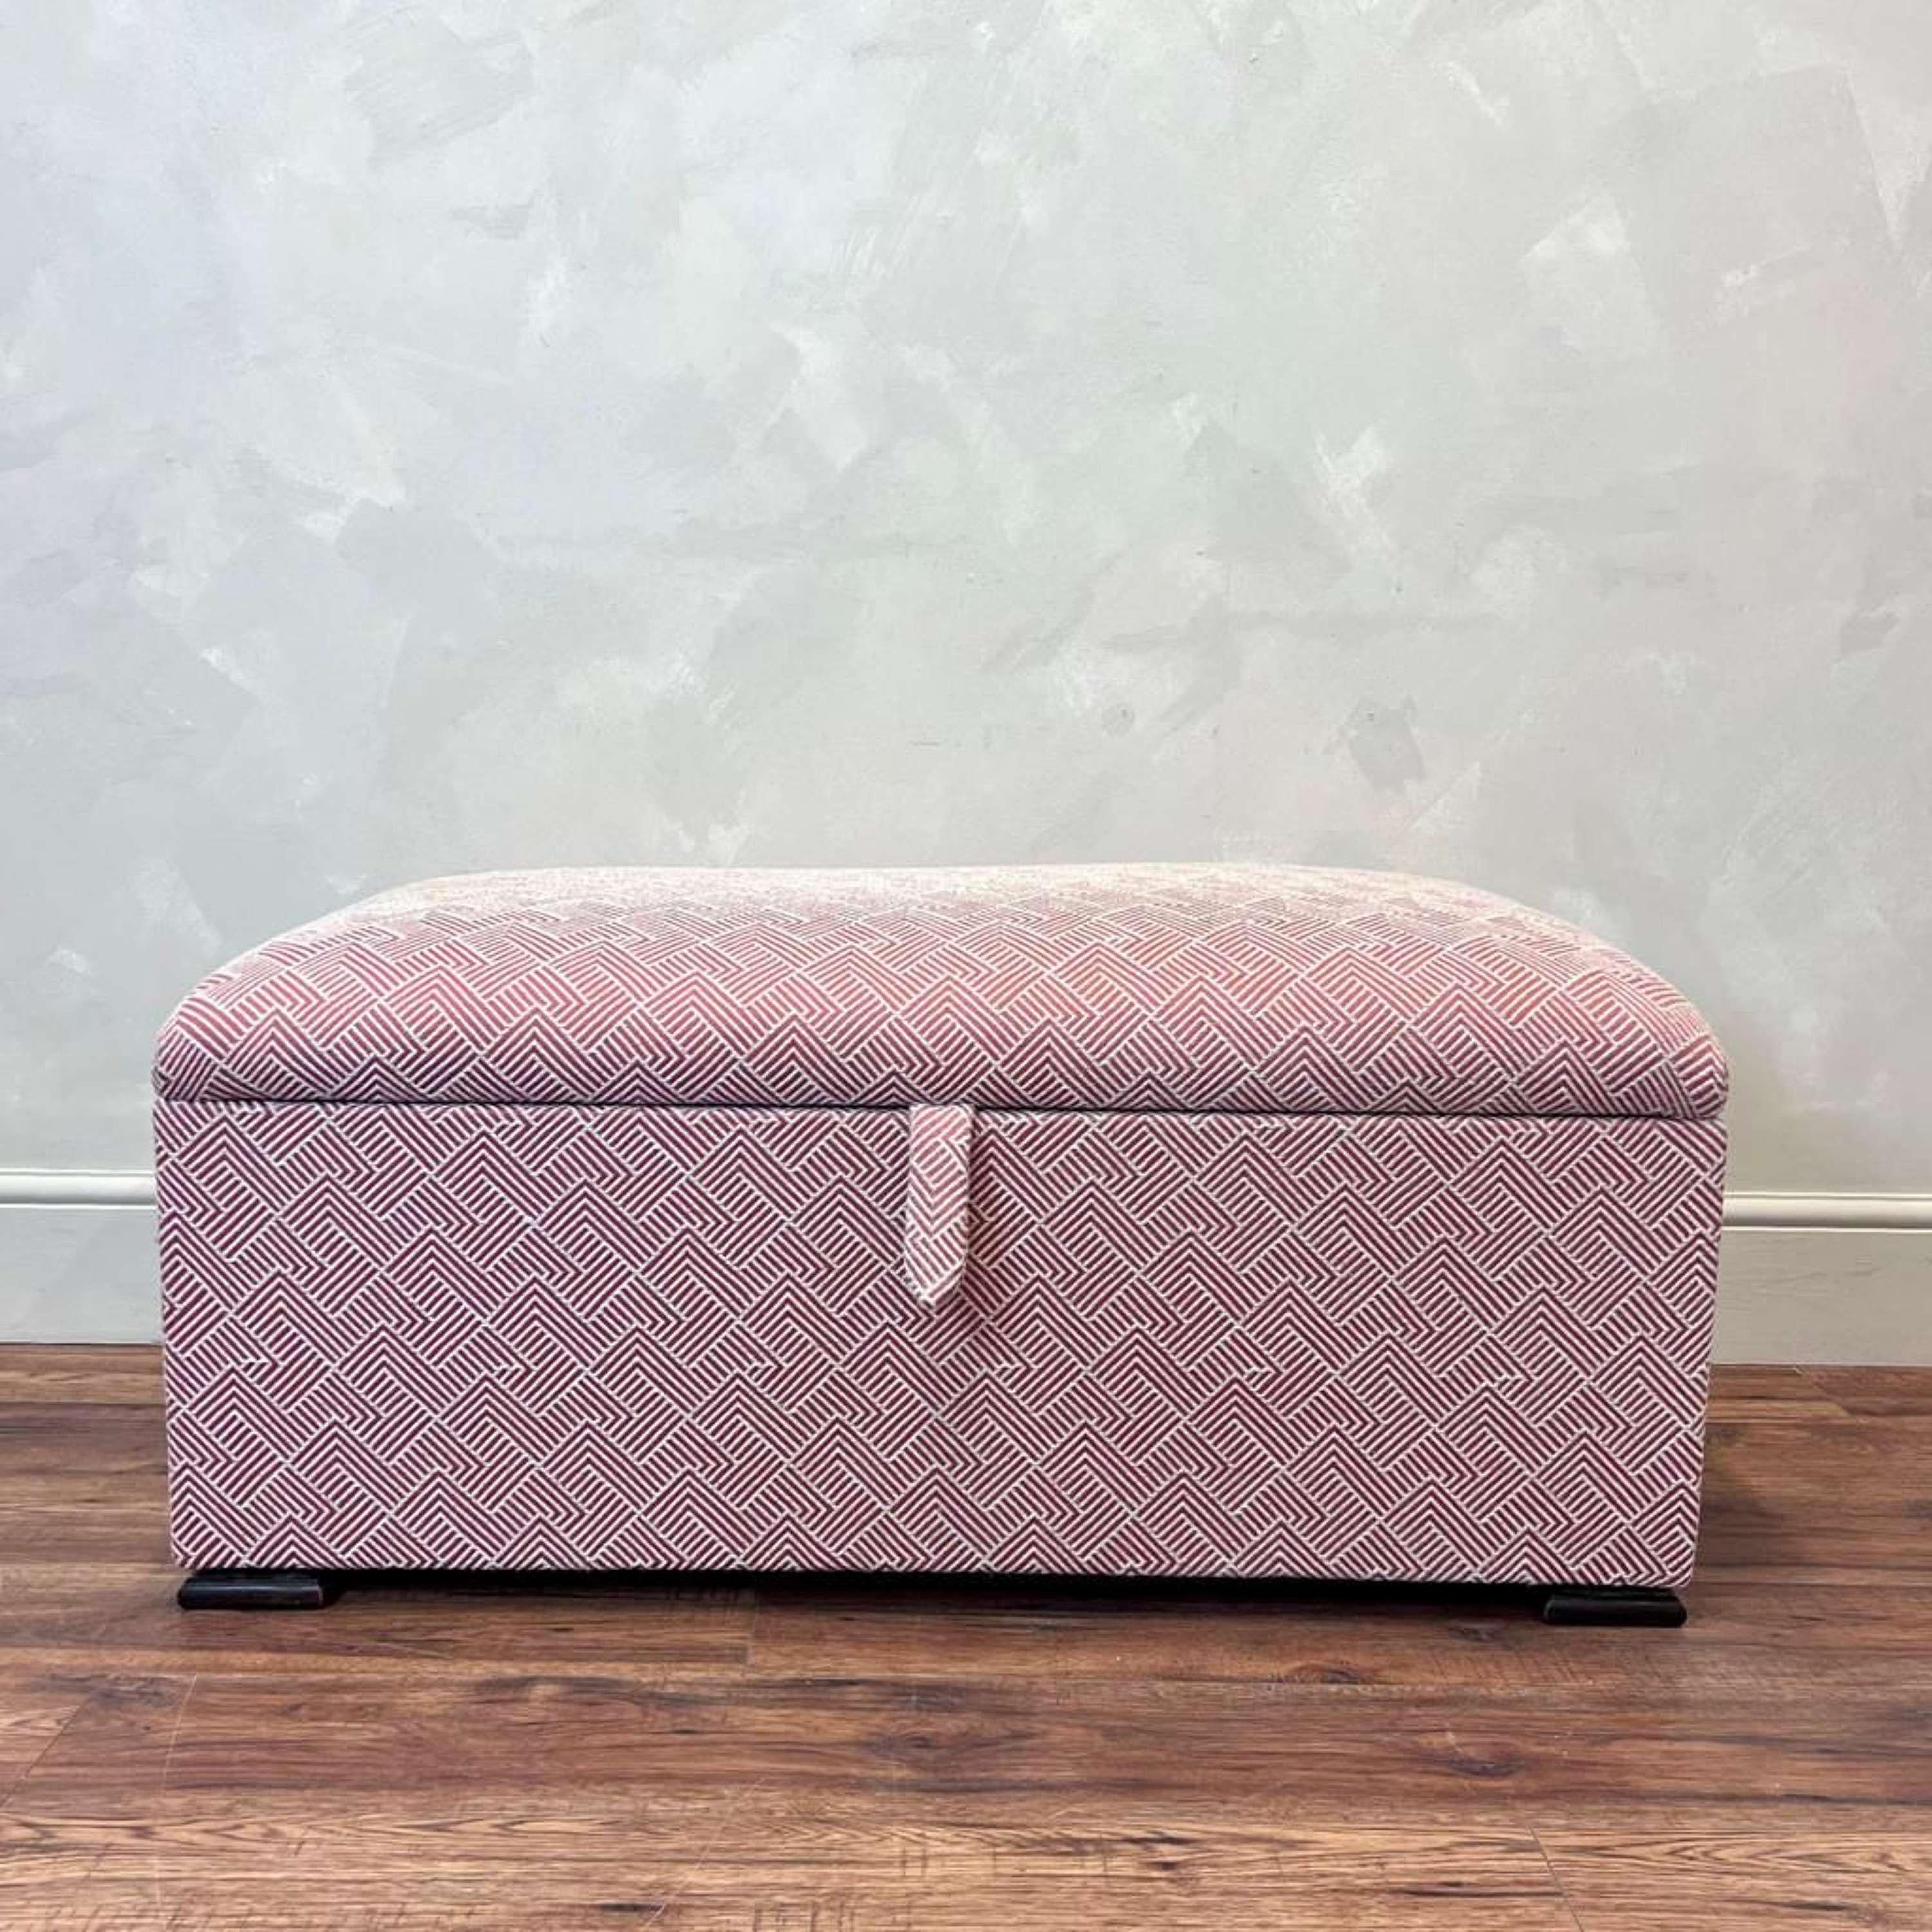 19th Century English Ottoman Footstool, newly upholstered in quality bespoke Kit Kemp geometric fabric.
Complete with fabric lid handle.
Lined with calico.

Length - 107.5 cm
height - 50 cm
Depth 54.5 cm
Please message if any further info or photos